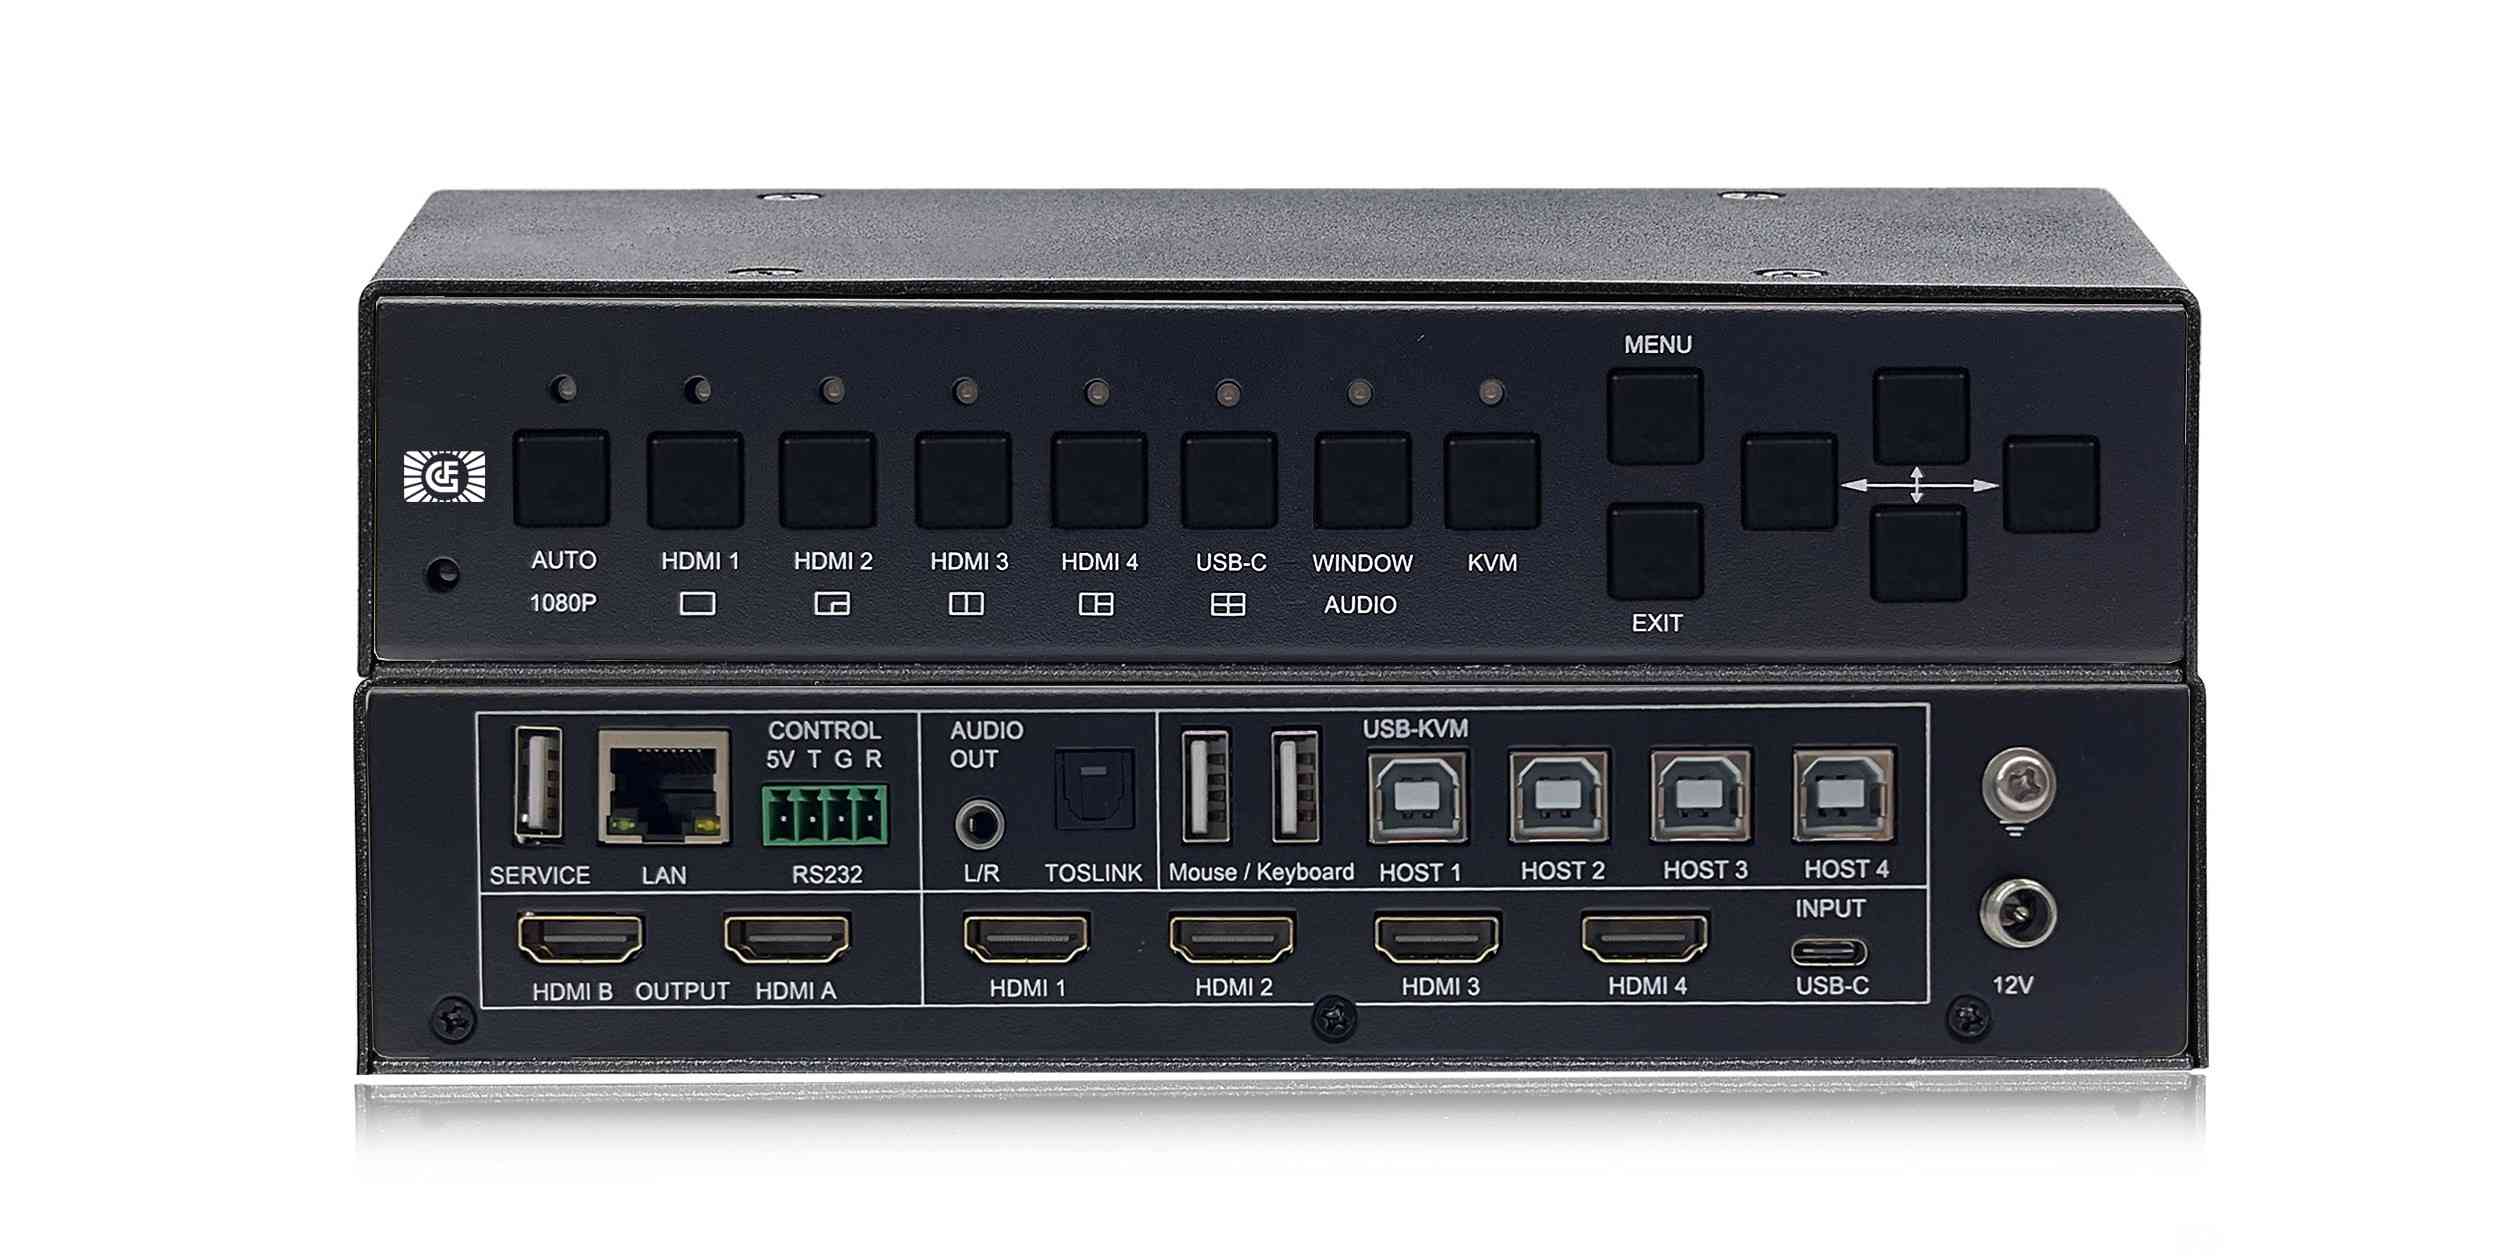 HDMI SWITCHER 4 IN 2 OUT With Network Control 4K60